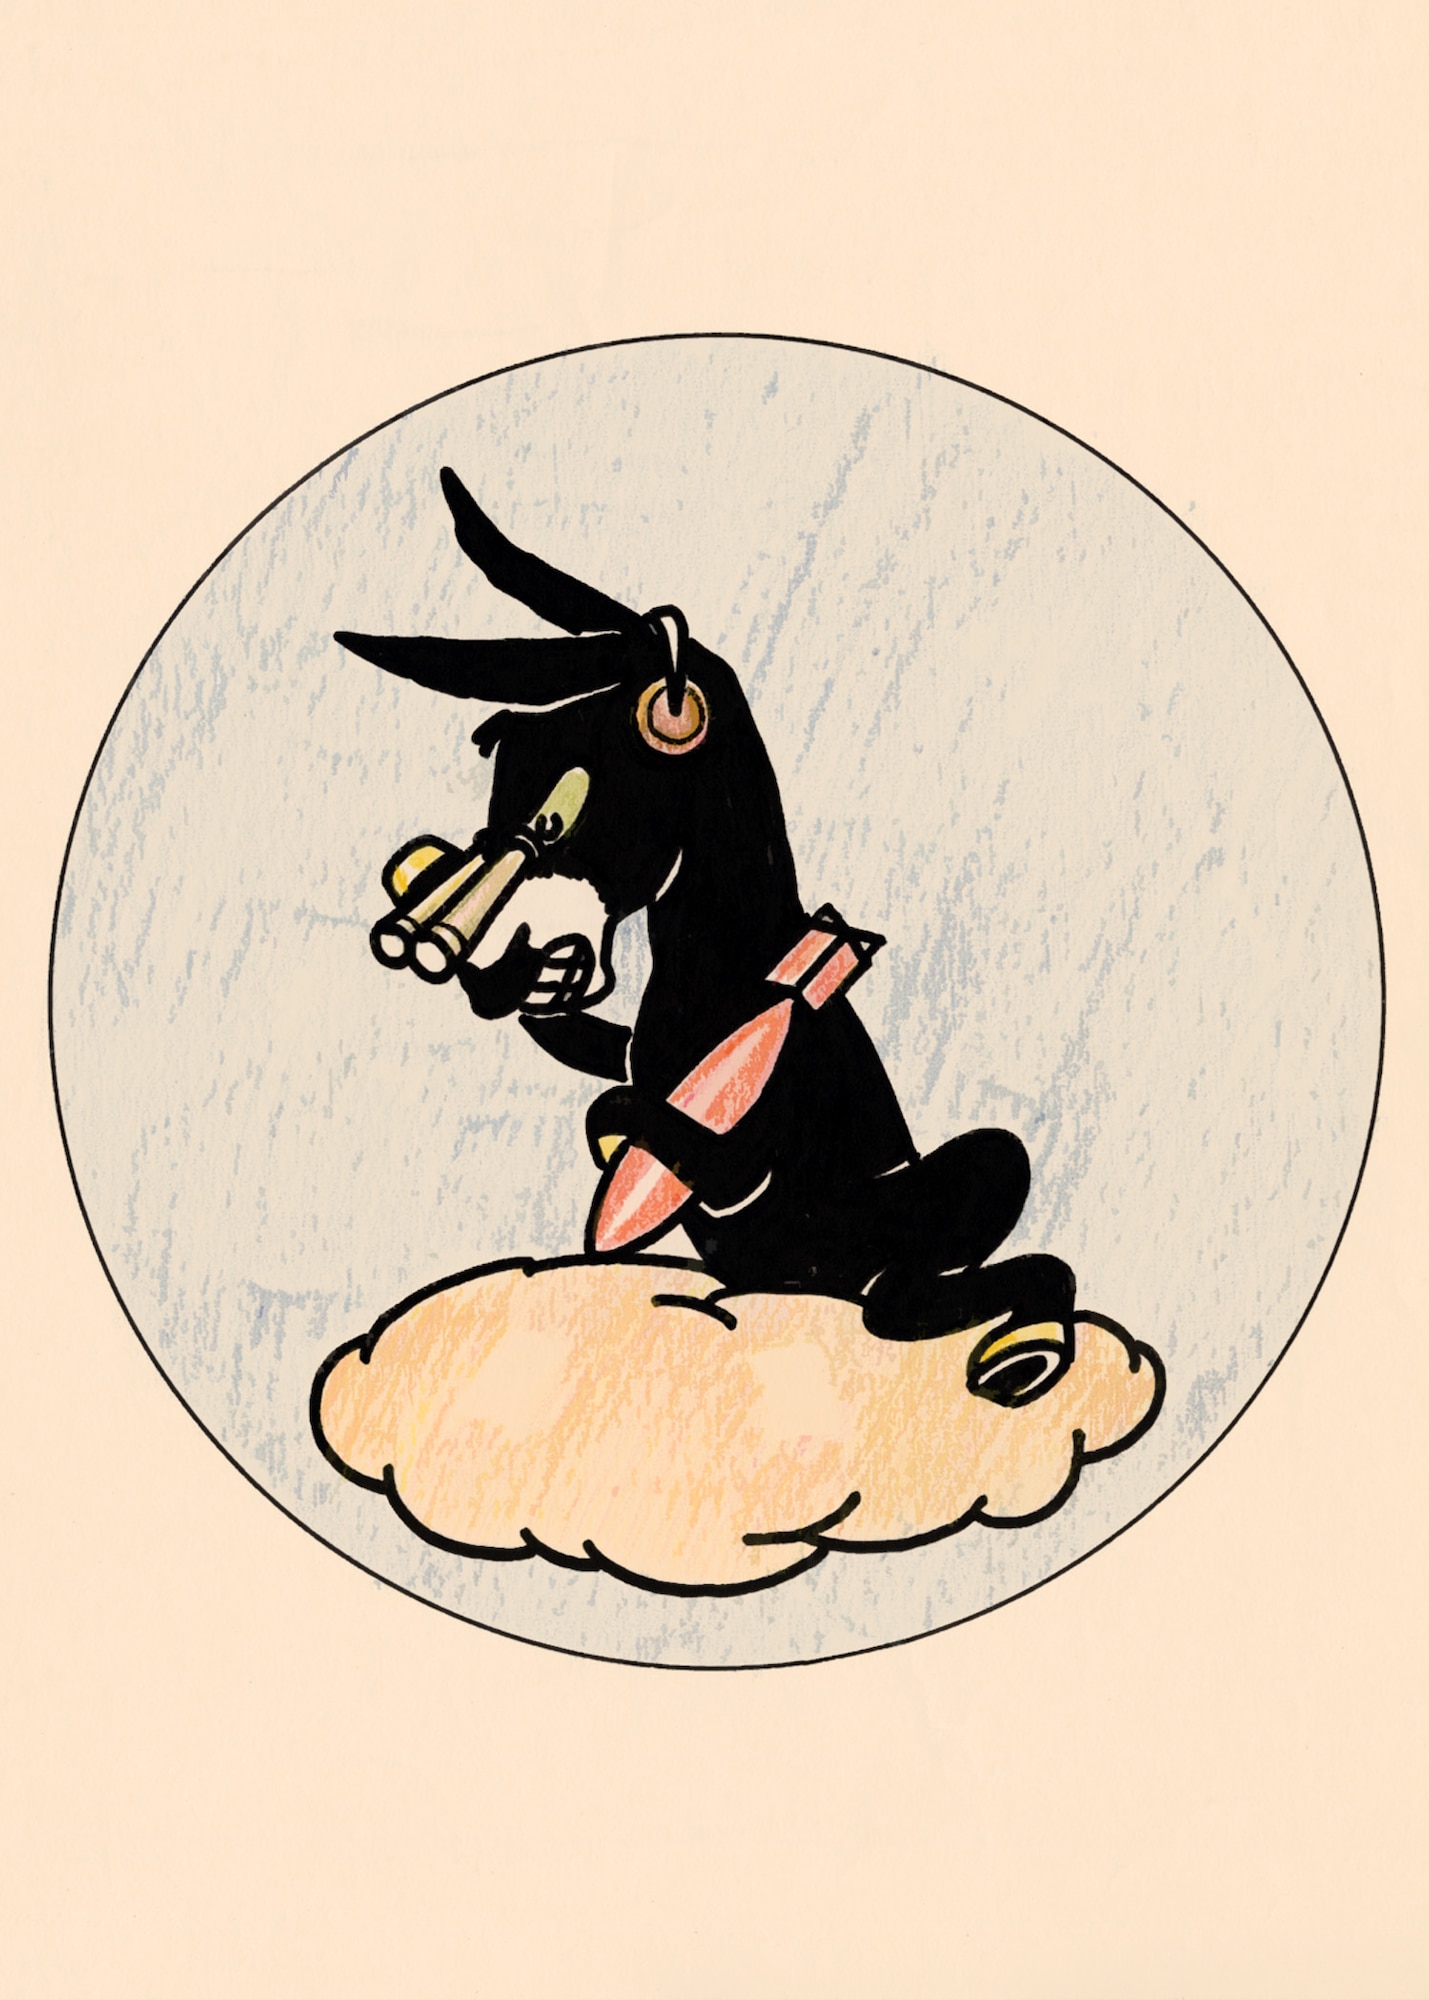 Pen and ink drawing of Banjo A Burro, the Missouri Mule mascot of the 131st Bomb Wing and 110th Bomb Squadron, circa 1950's.  (131st Bomb Wing file photo/RELEASED)